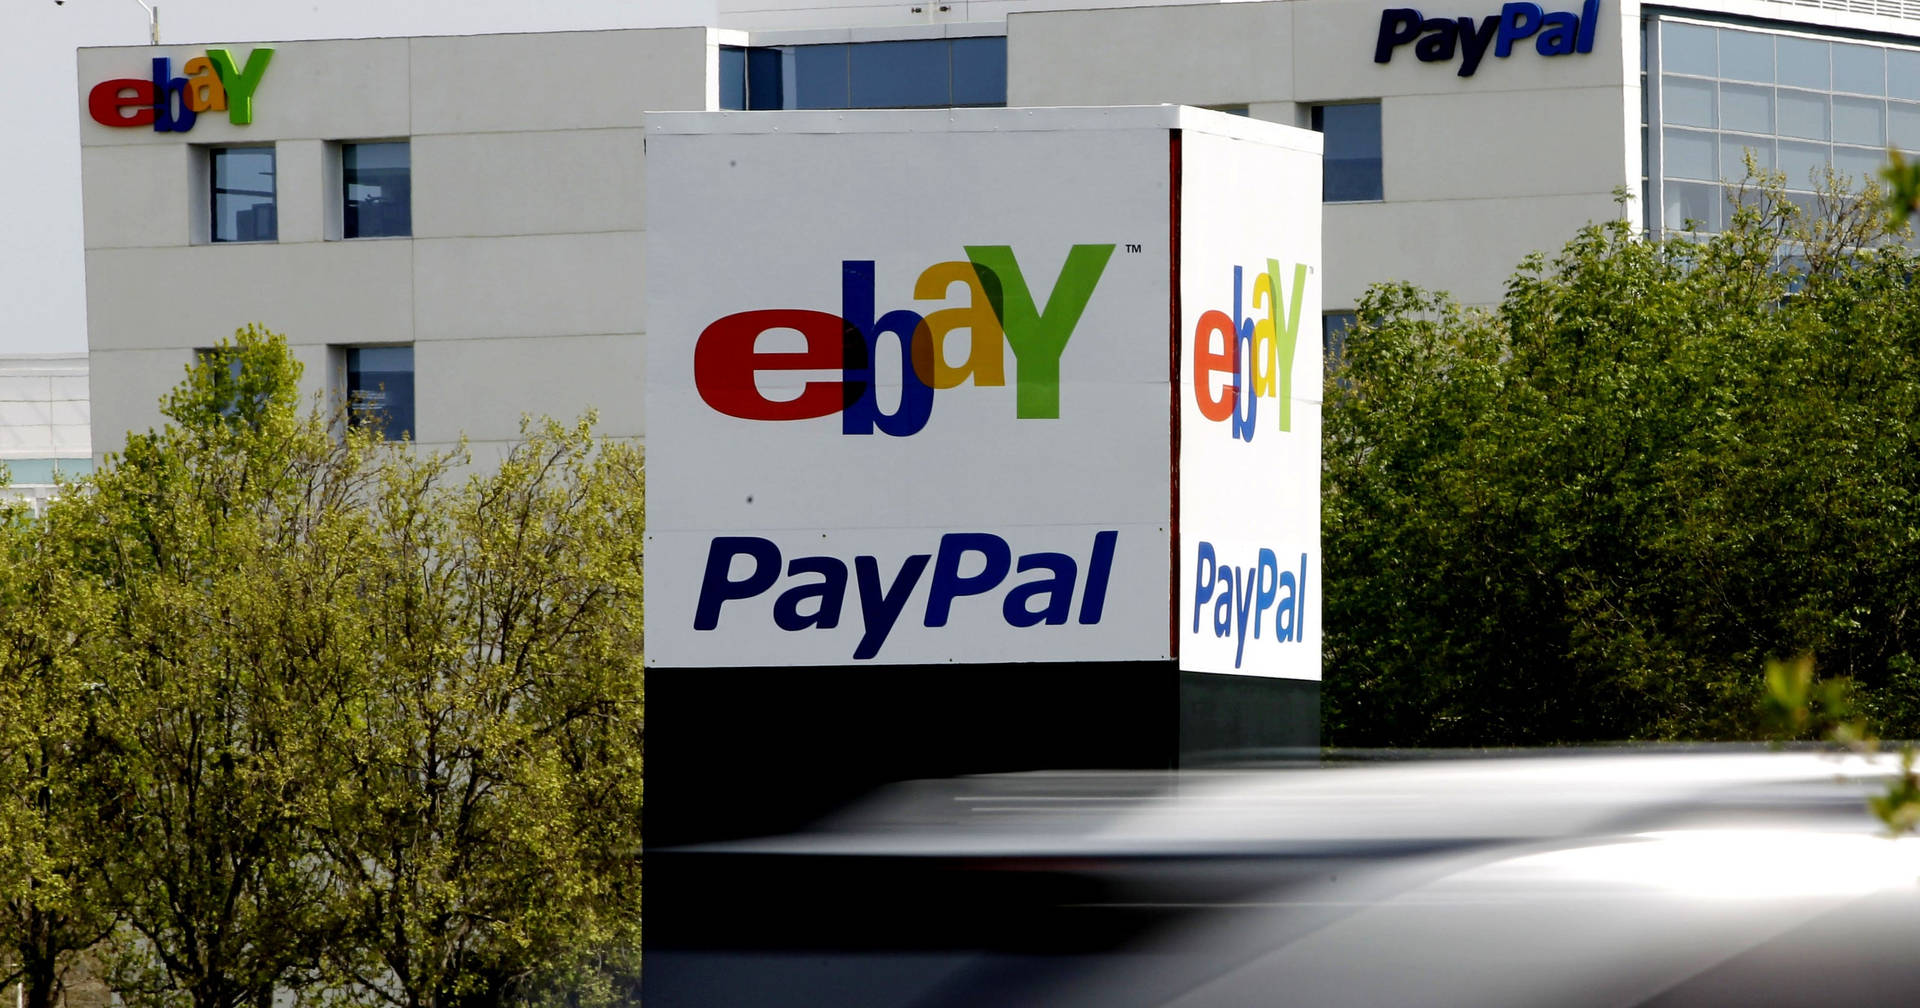 Ebay Over Paypal Wallpaper